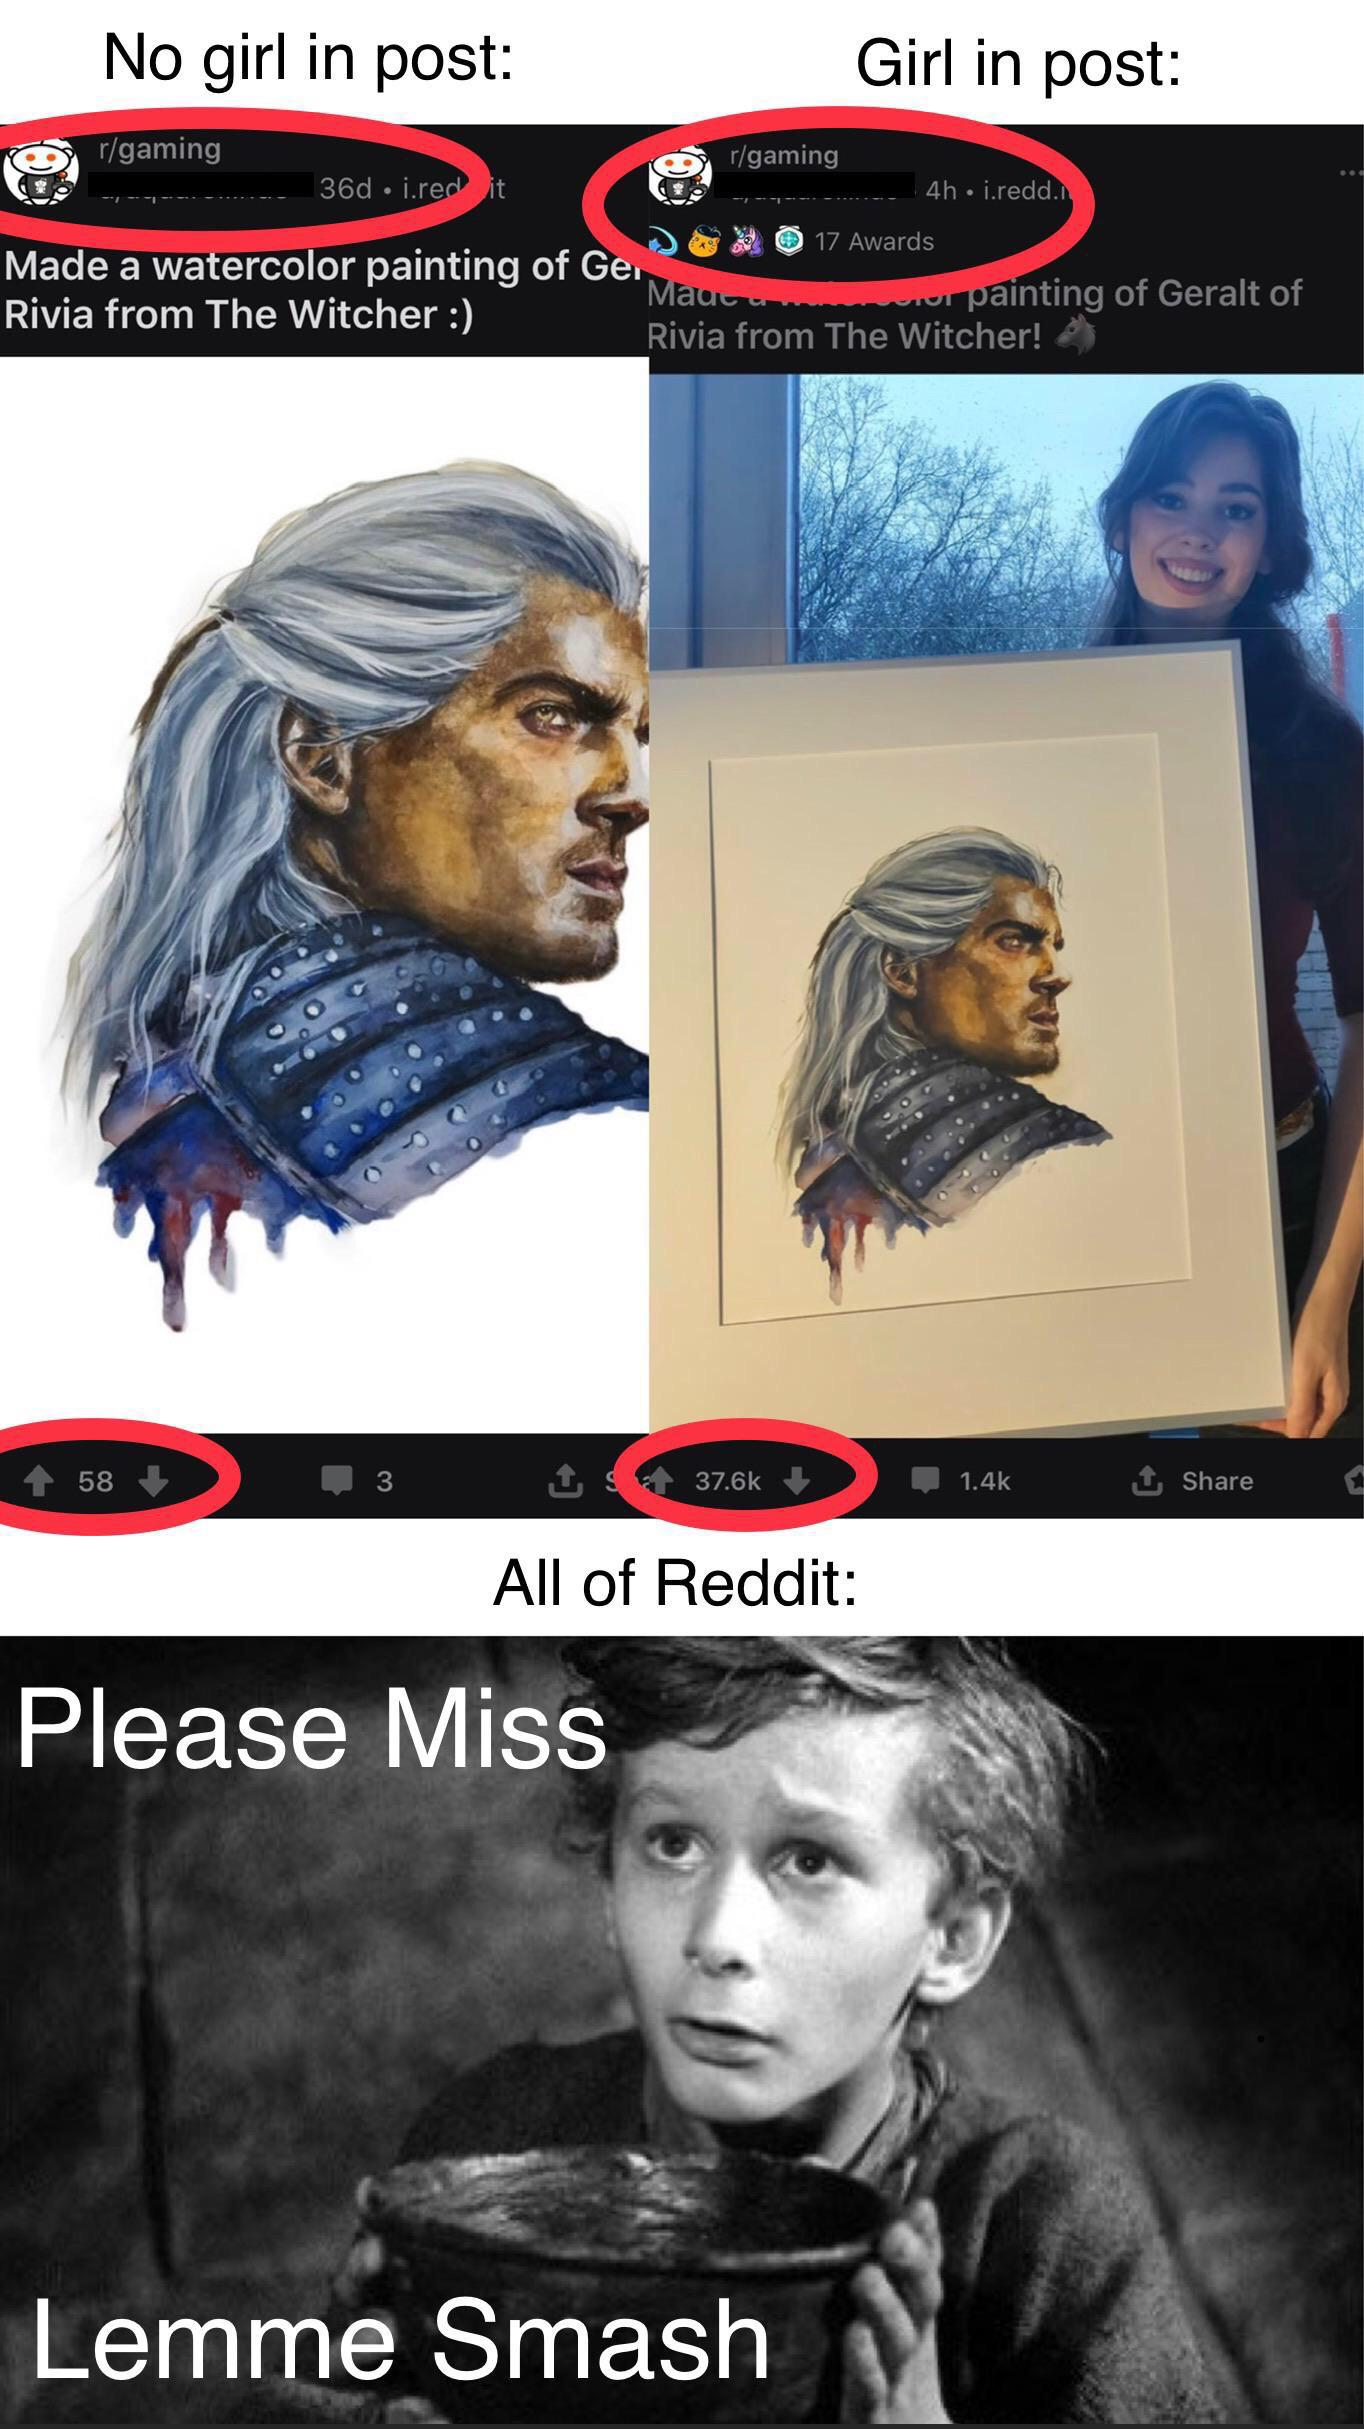 Second - No girl in post Girl in post 20 _ Om Made a watercolor painting of Gc Rivia from The Witcher ting of Geralt of Rivia from The Witcher! All of Reddit Please Miss Lemme Smash